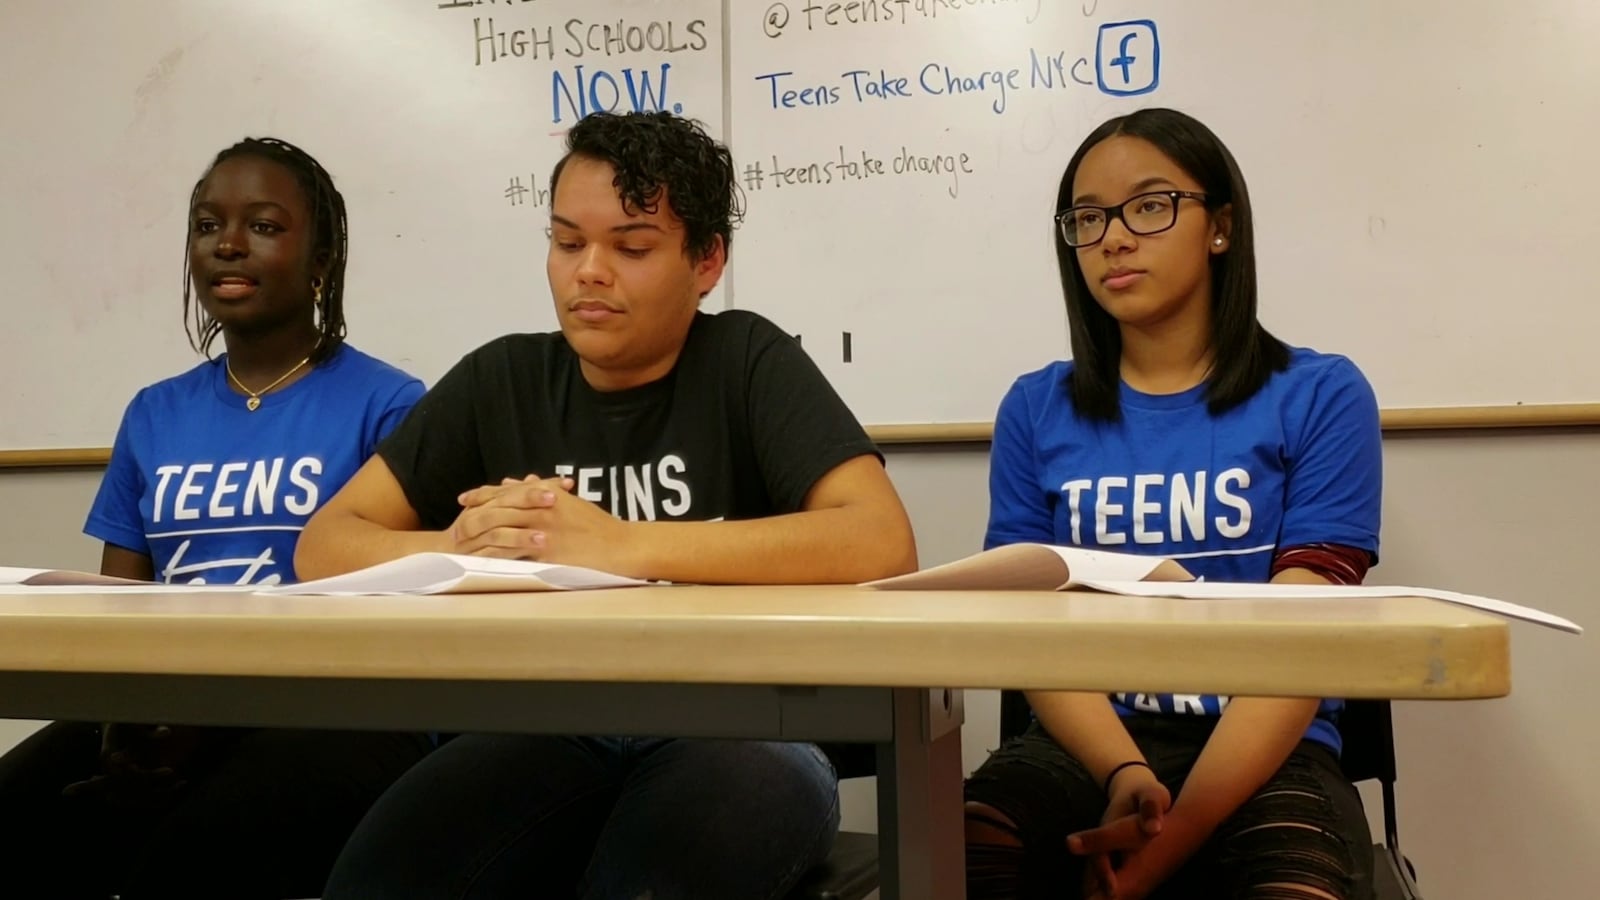 Teens Take Charge members at a "virtual" press conference in New York City on Thursday